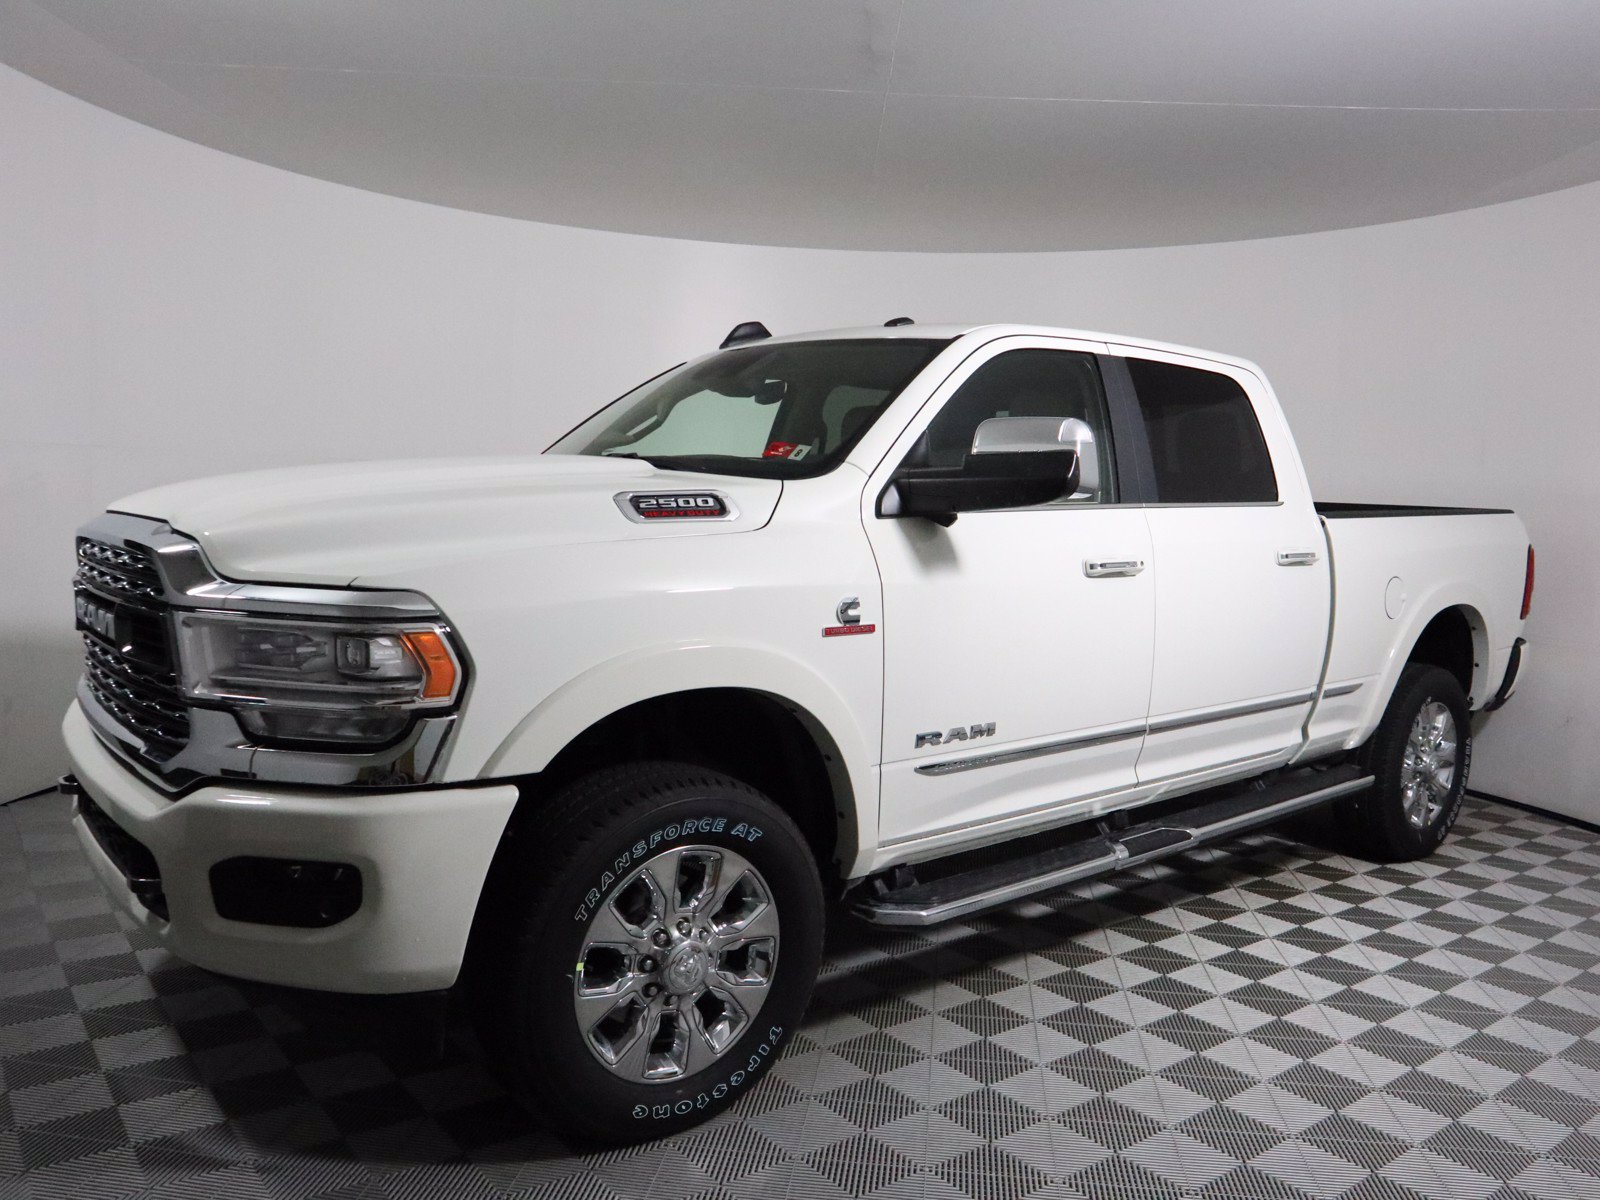 New 2020 Ram 2500 Limited Crew Cab Pickup in Parkersburg #D8495 ...